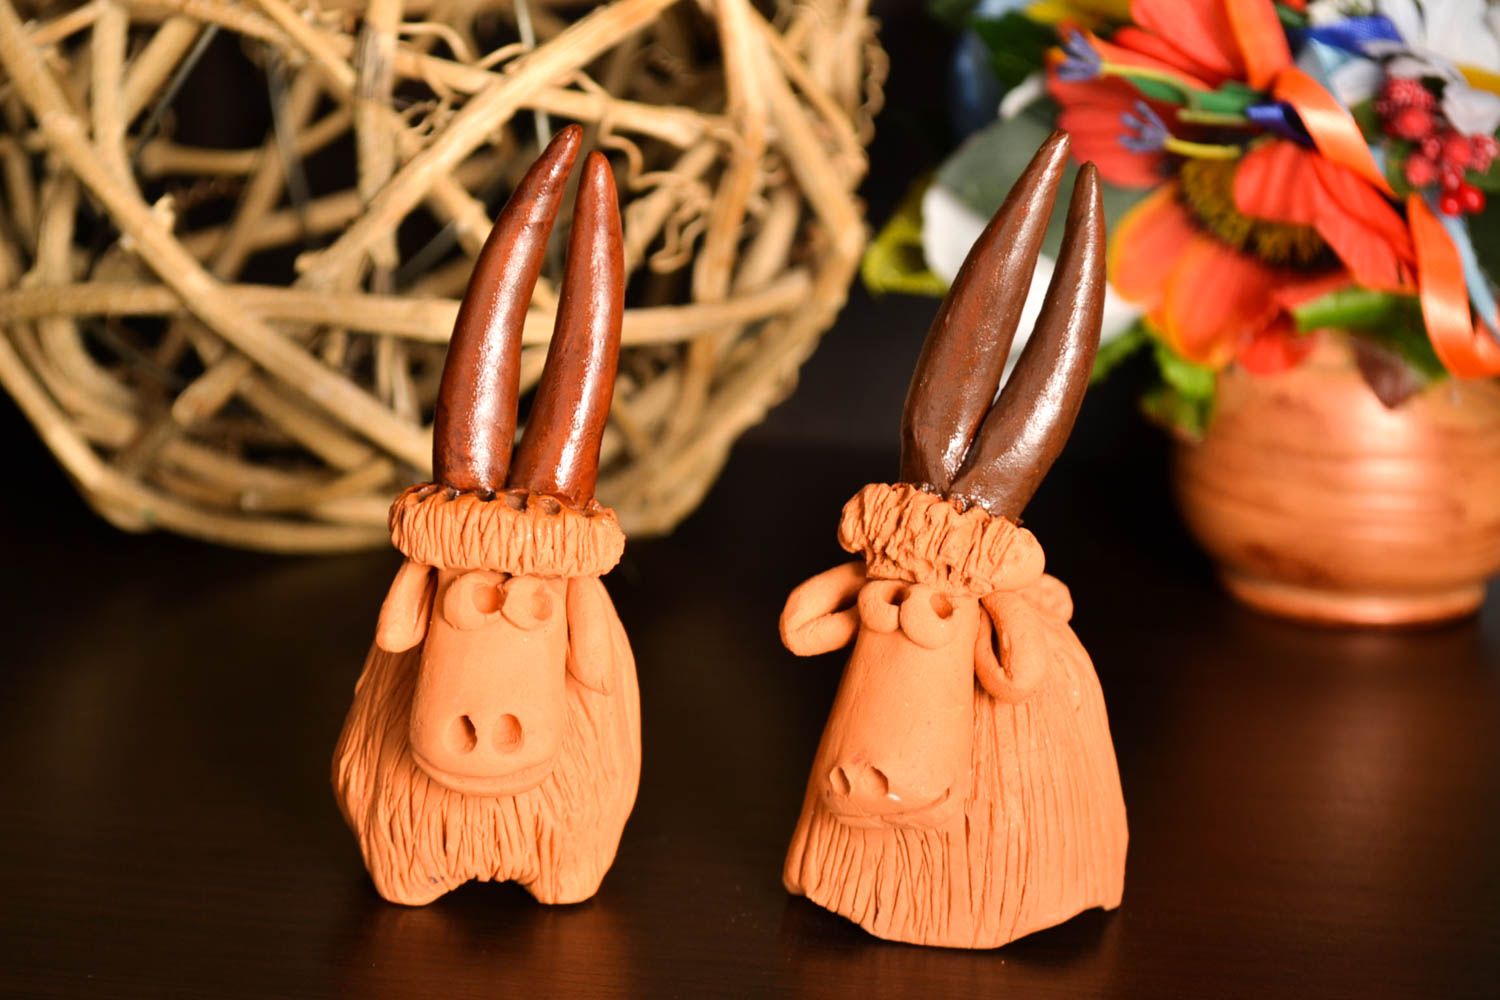 Handmade statuette clay figurines set of 2 items decorative use only gift ideas photo 1